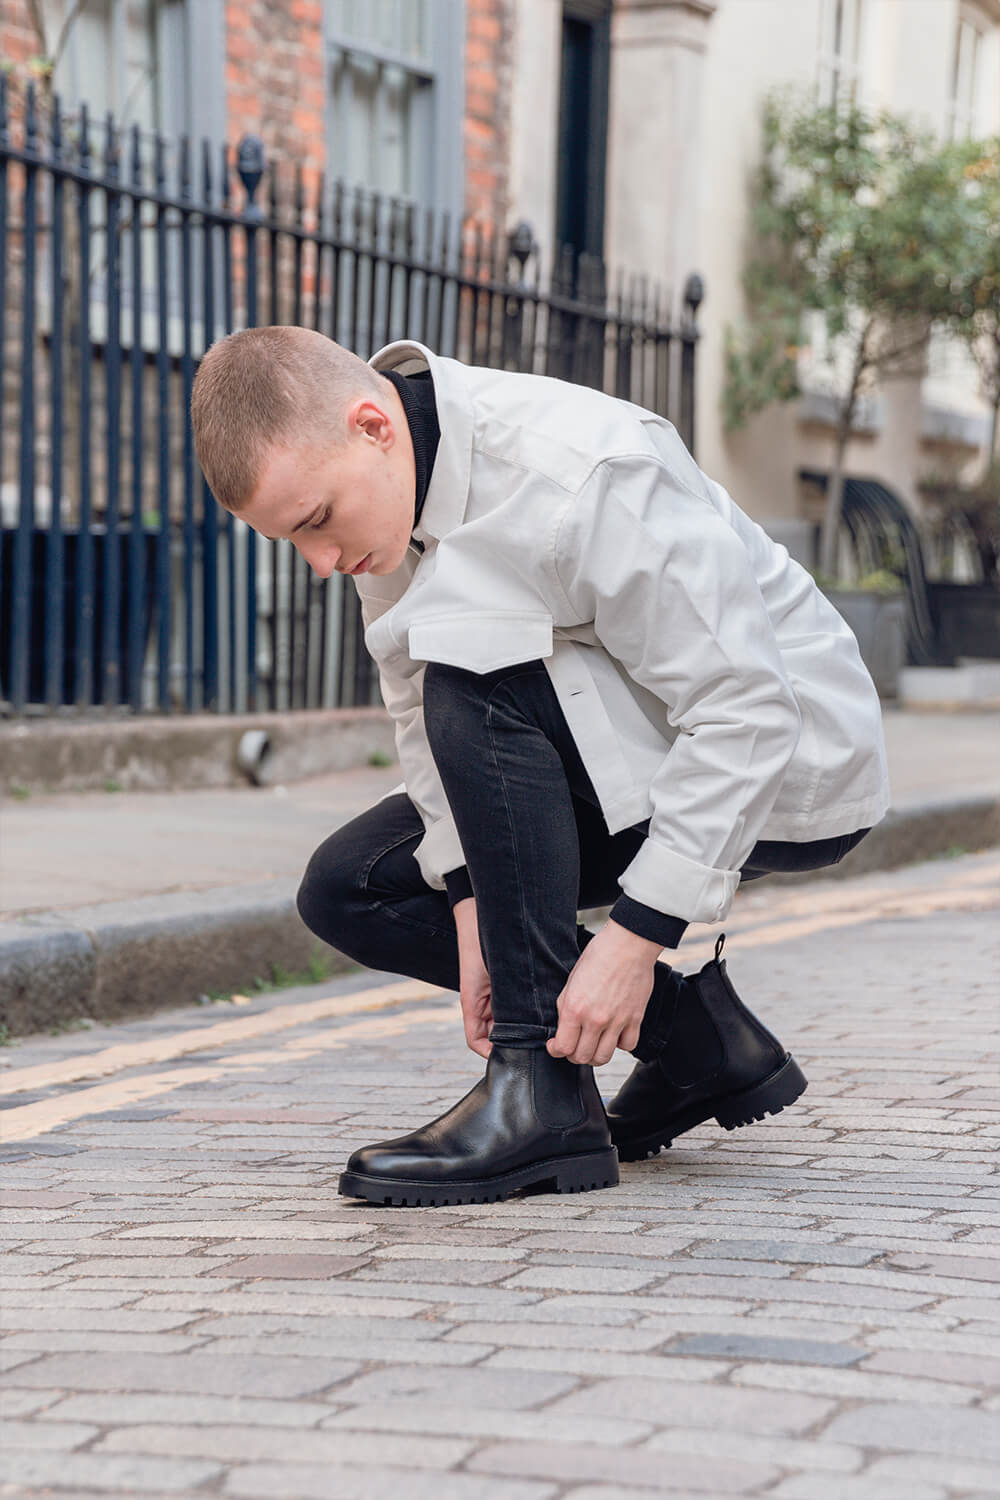 Chelsea Boots- One of the best to come out of Chelsea